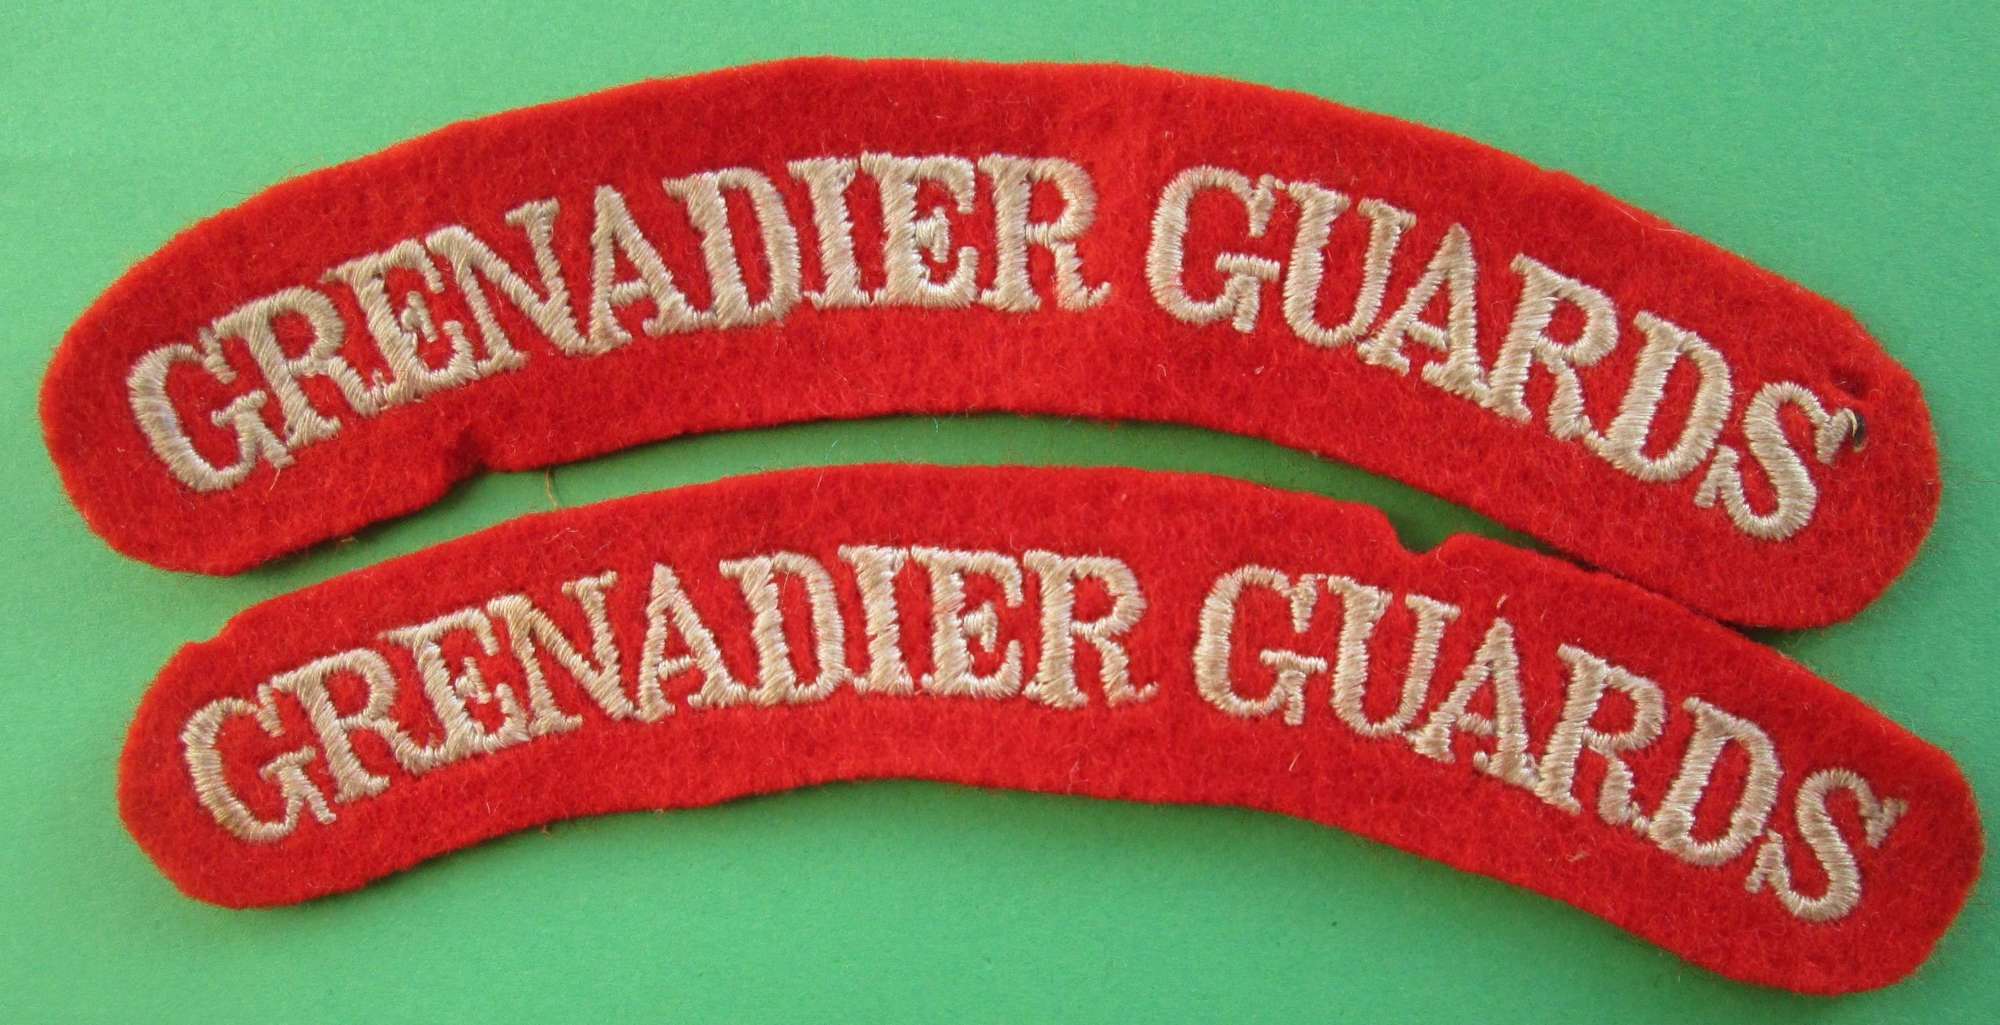 A PAIR OF GRENADIER GUARDS SHOULDER TITLES